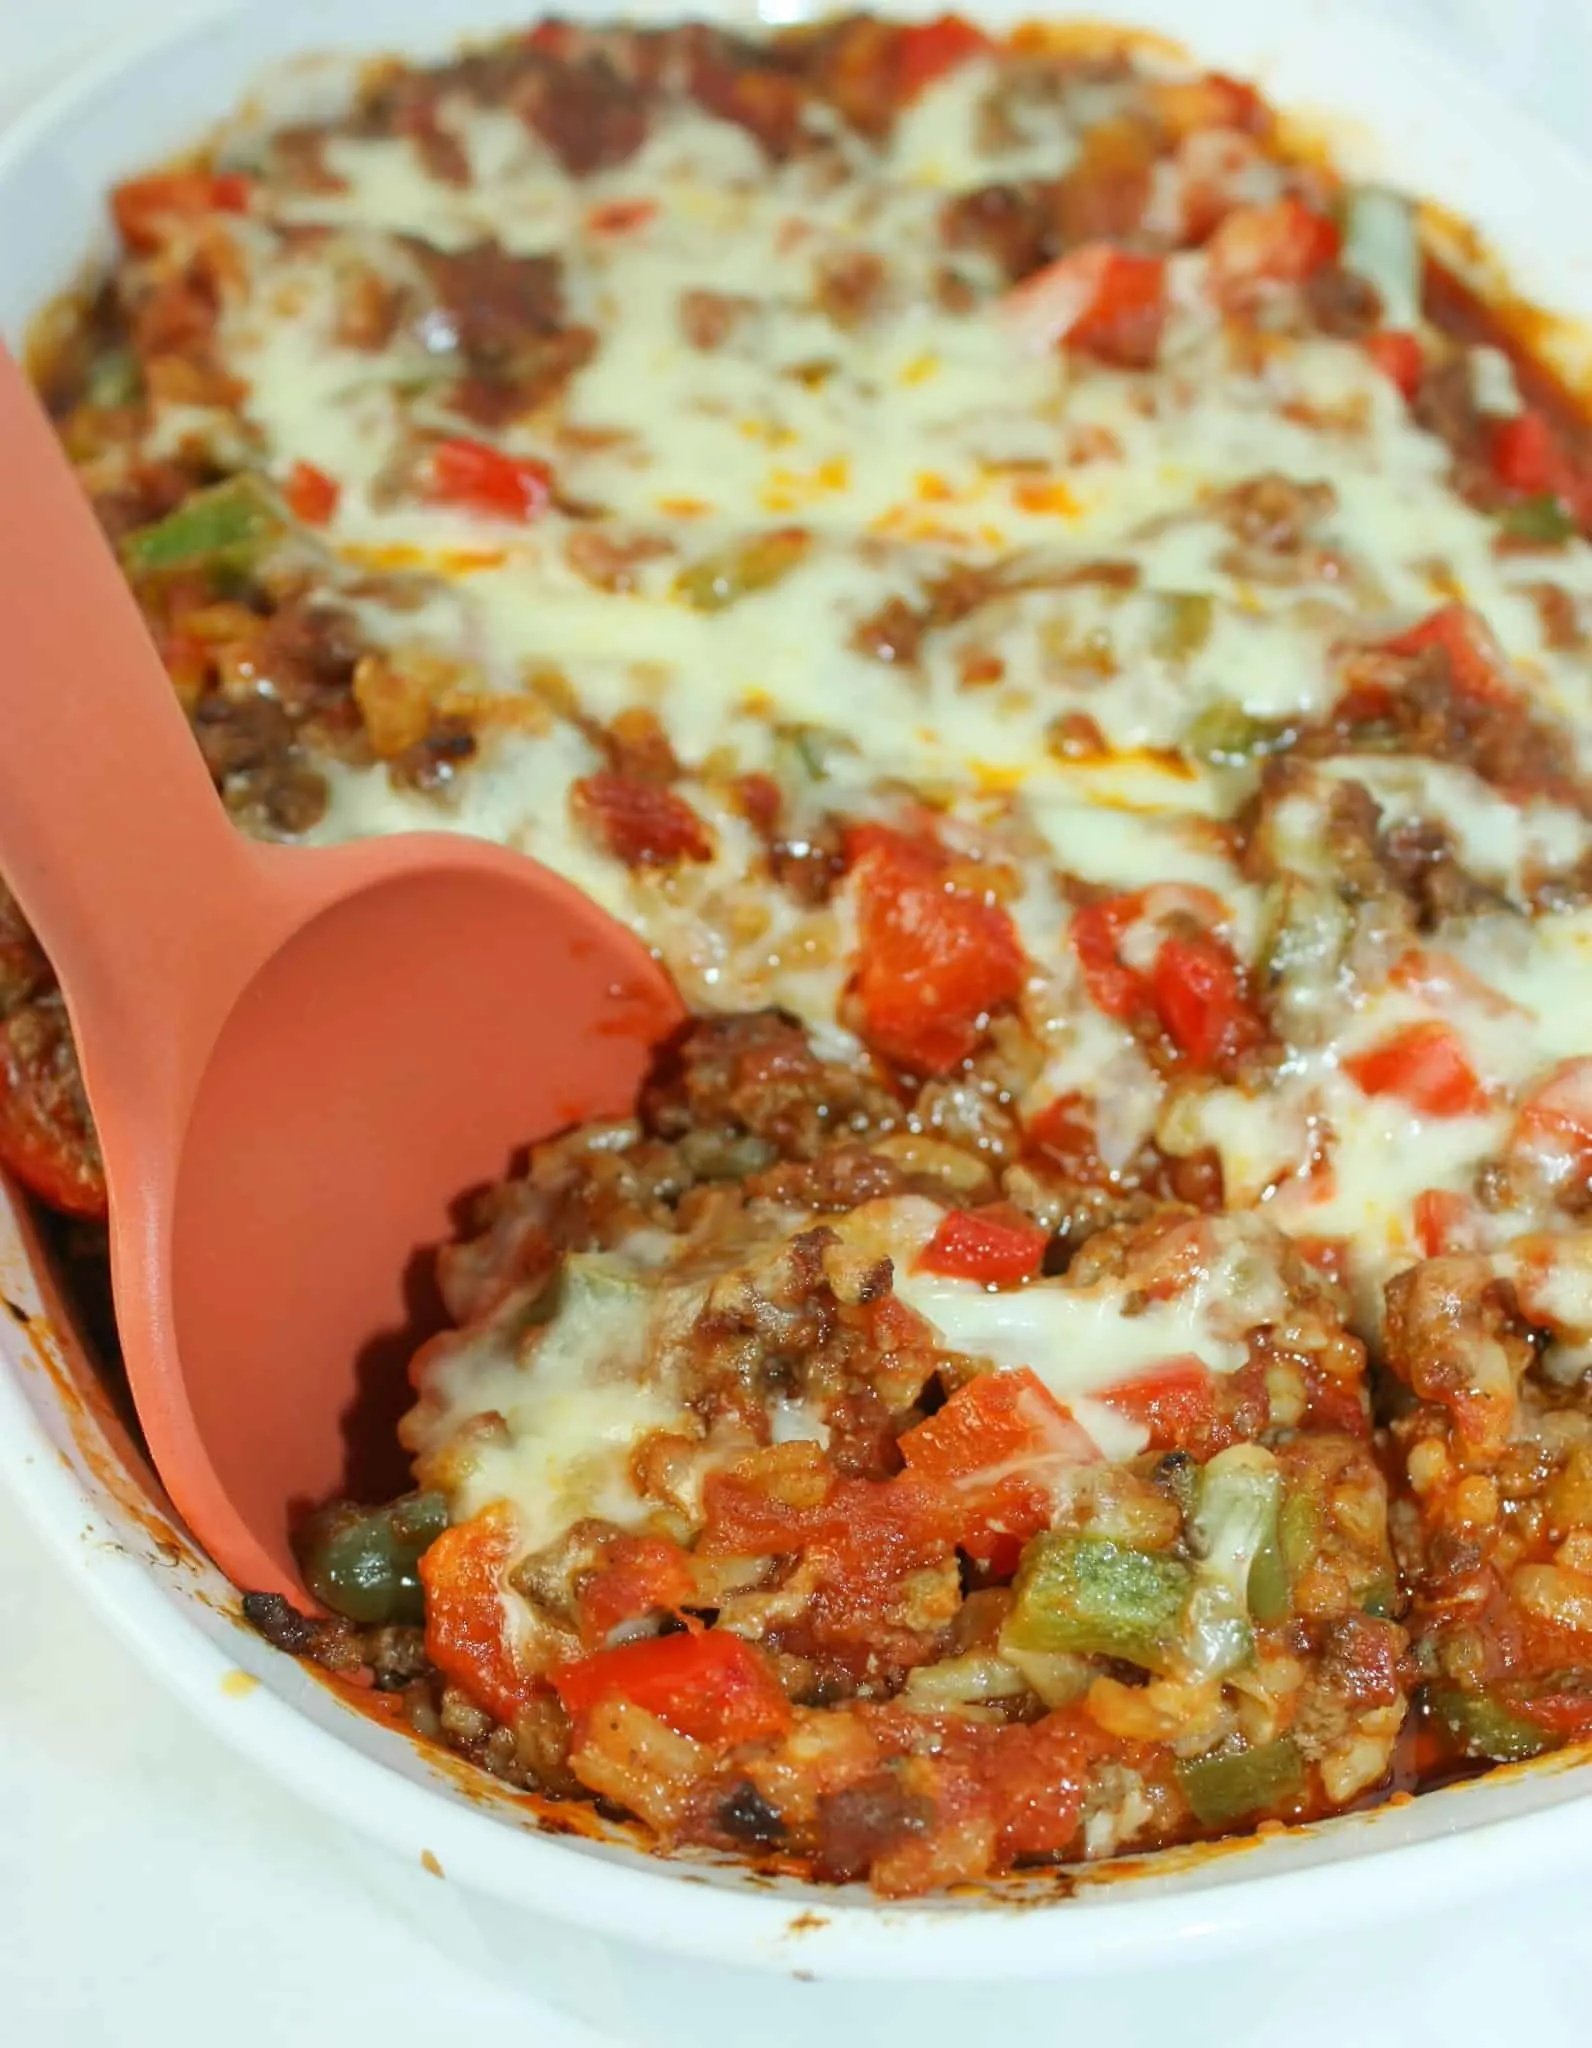 Undone Stuffed Peppers Casserole is a quick and easy dinner choice, created with ingredients that are staples in many people's cupboards.